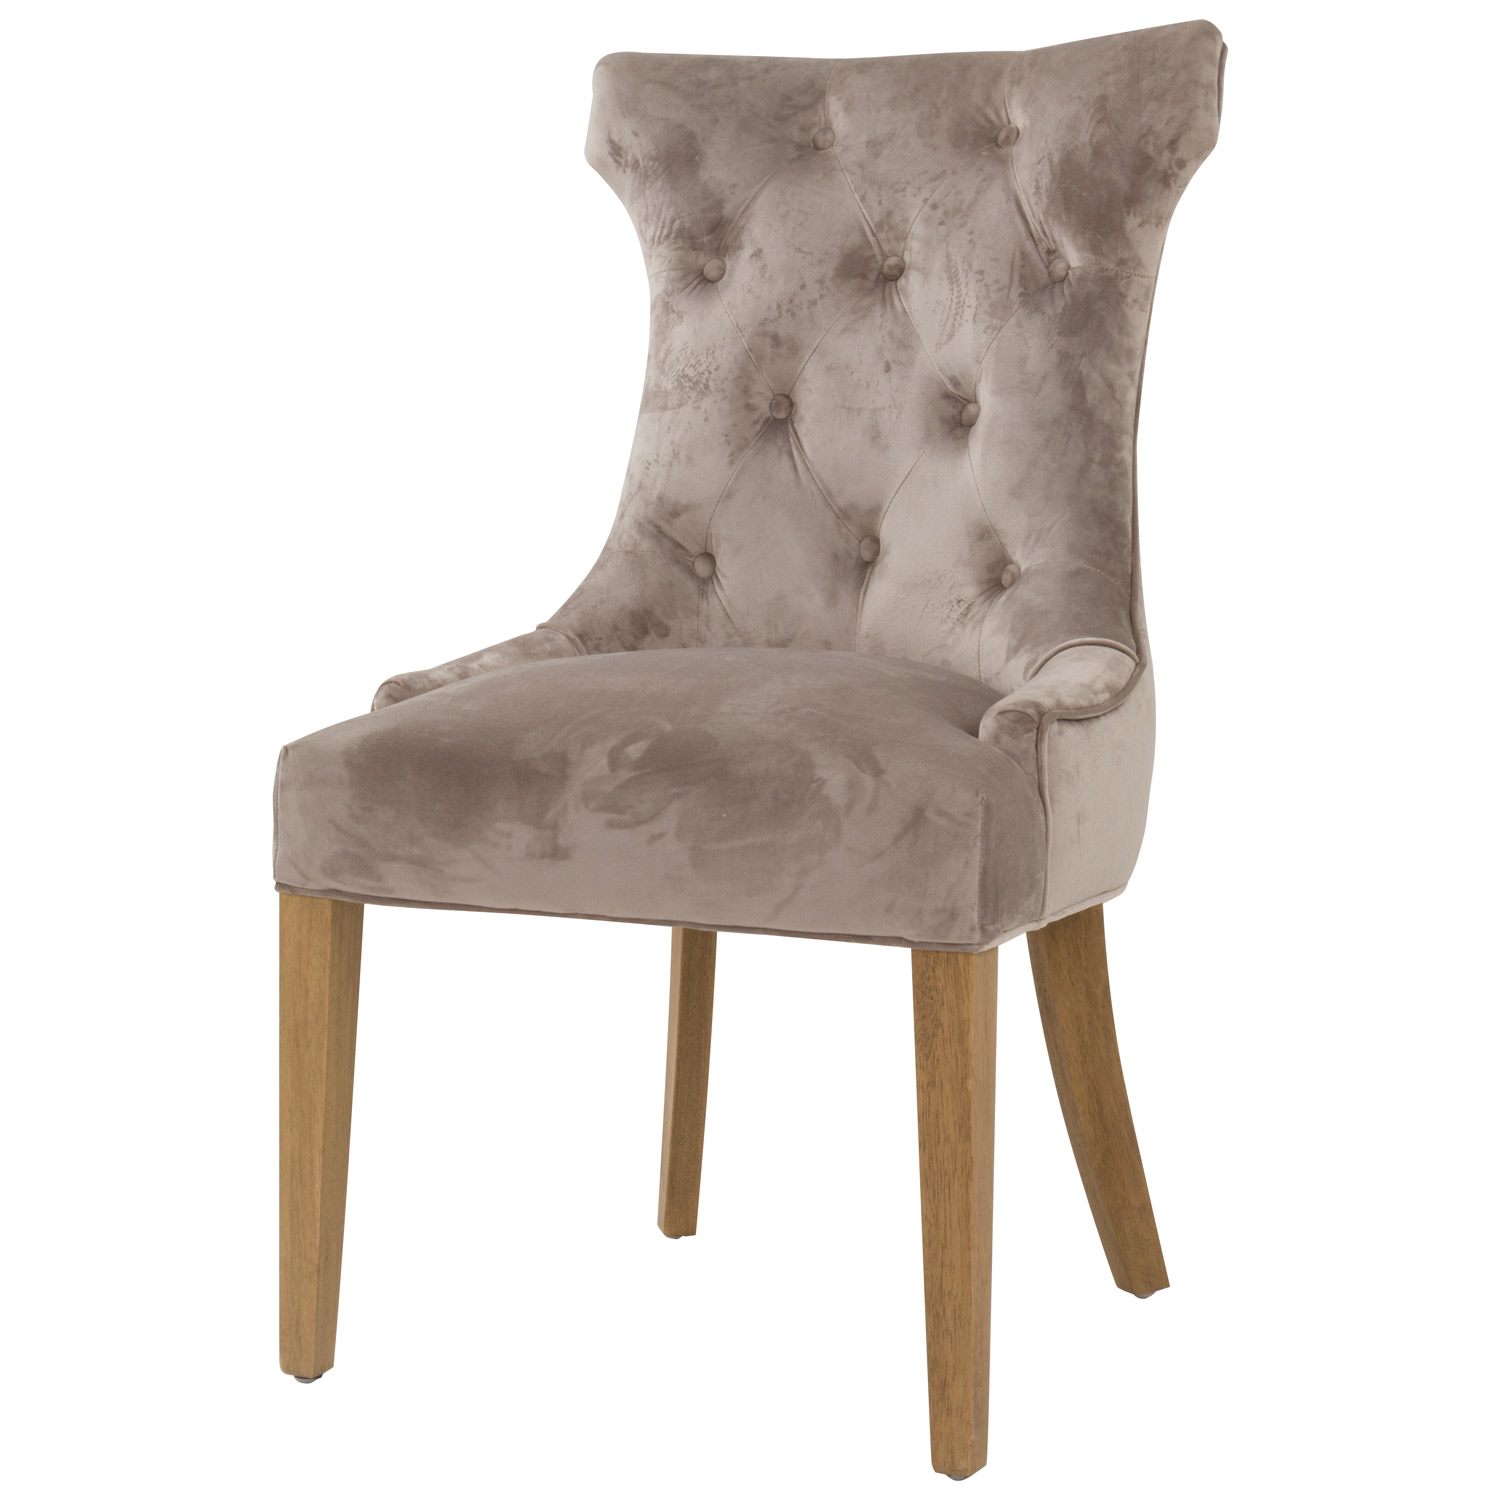 Chelsea High Wing Ring Backed Dining Chair - Image 1